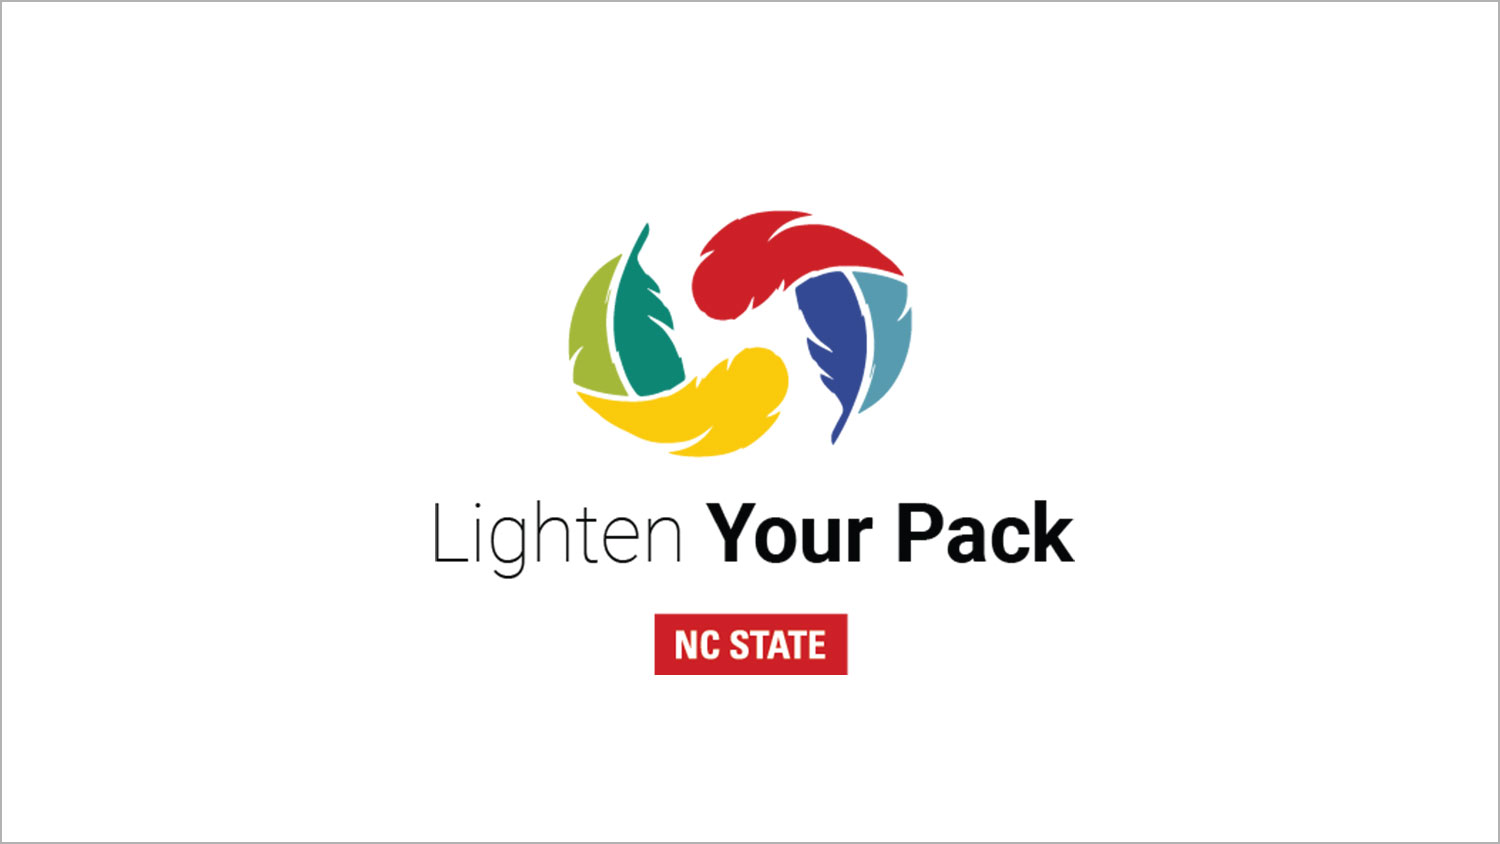 The Lighten Your Pack logo, which shows two feathers creating a circle.